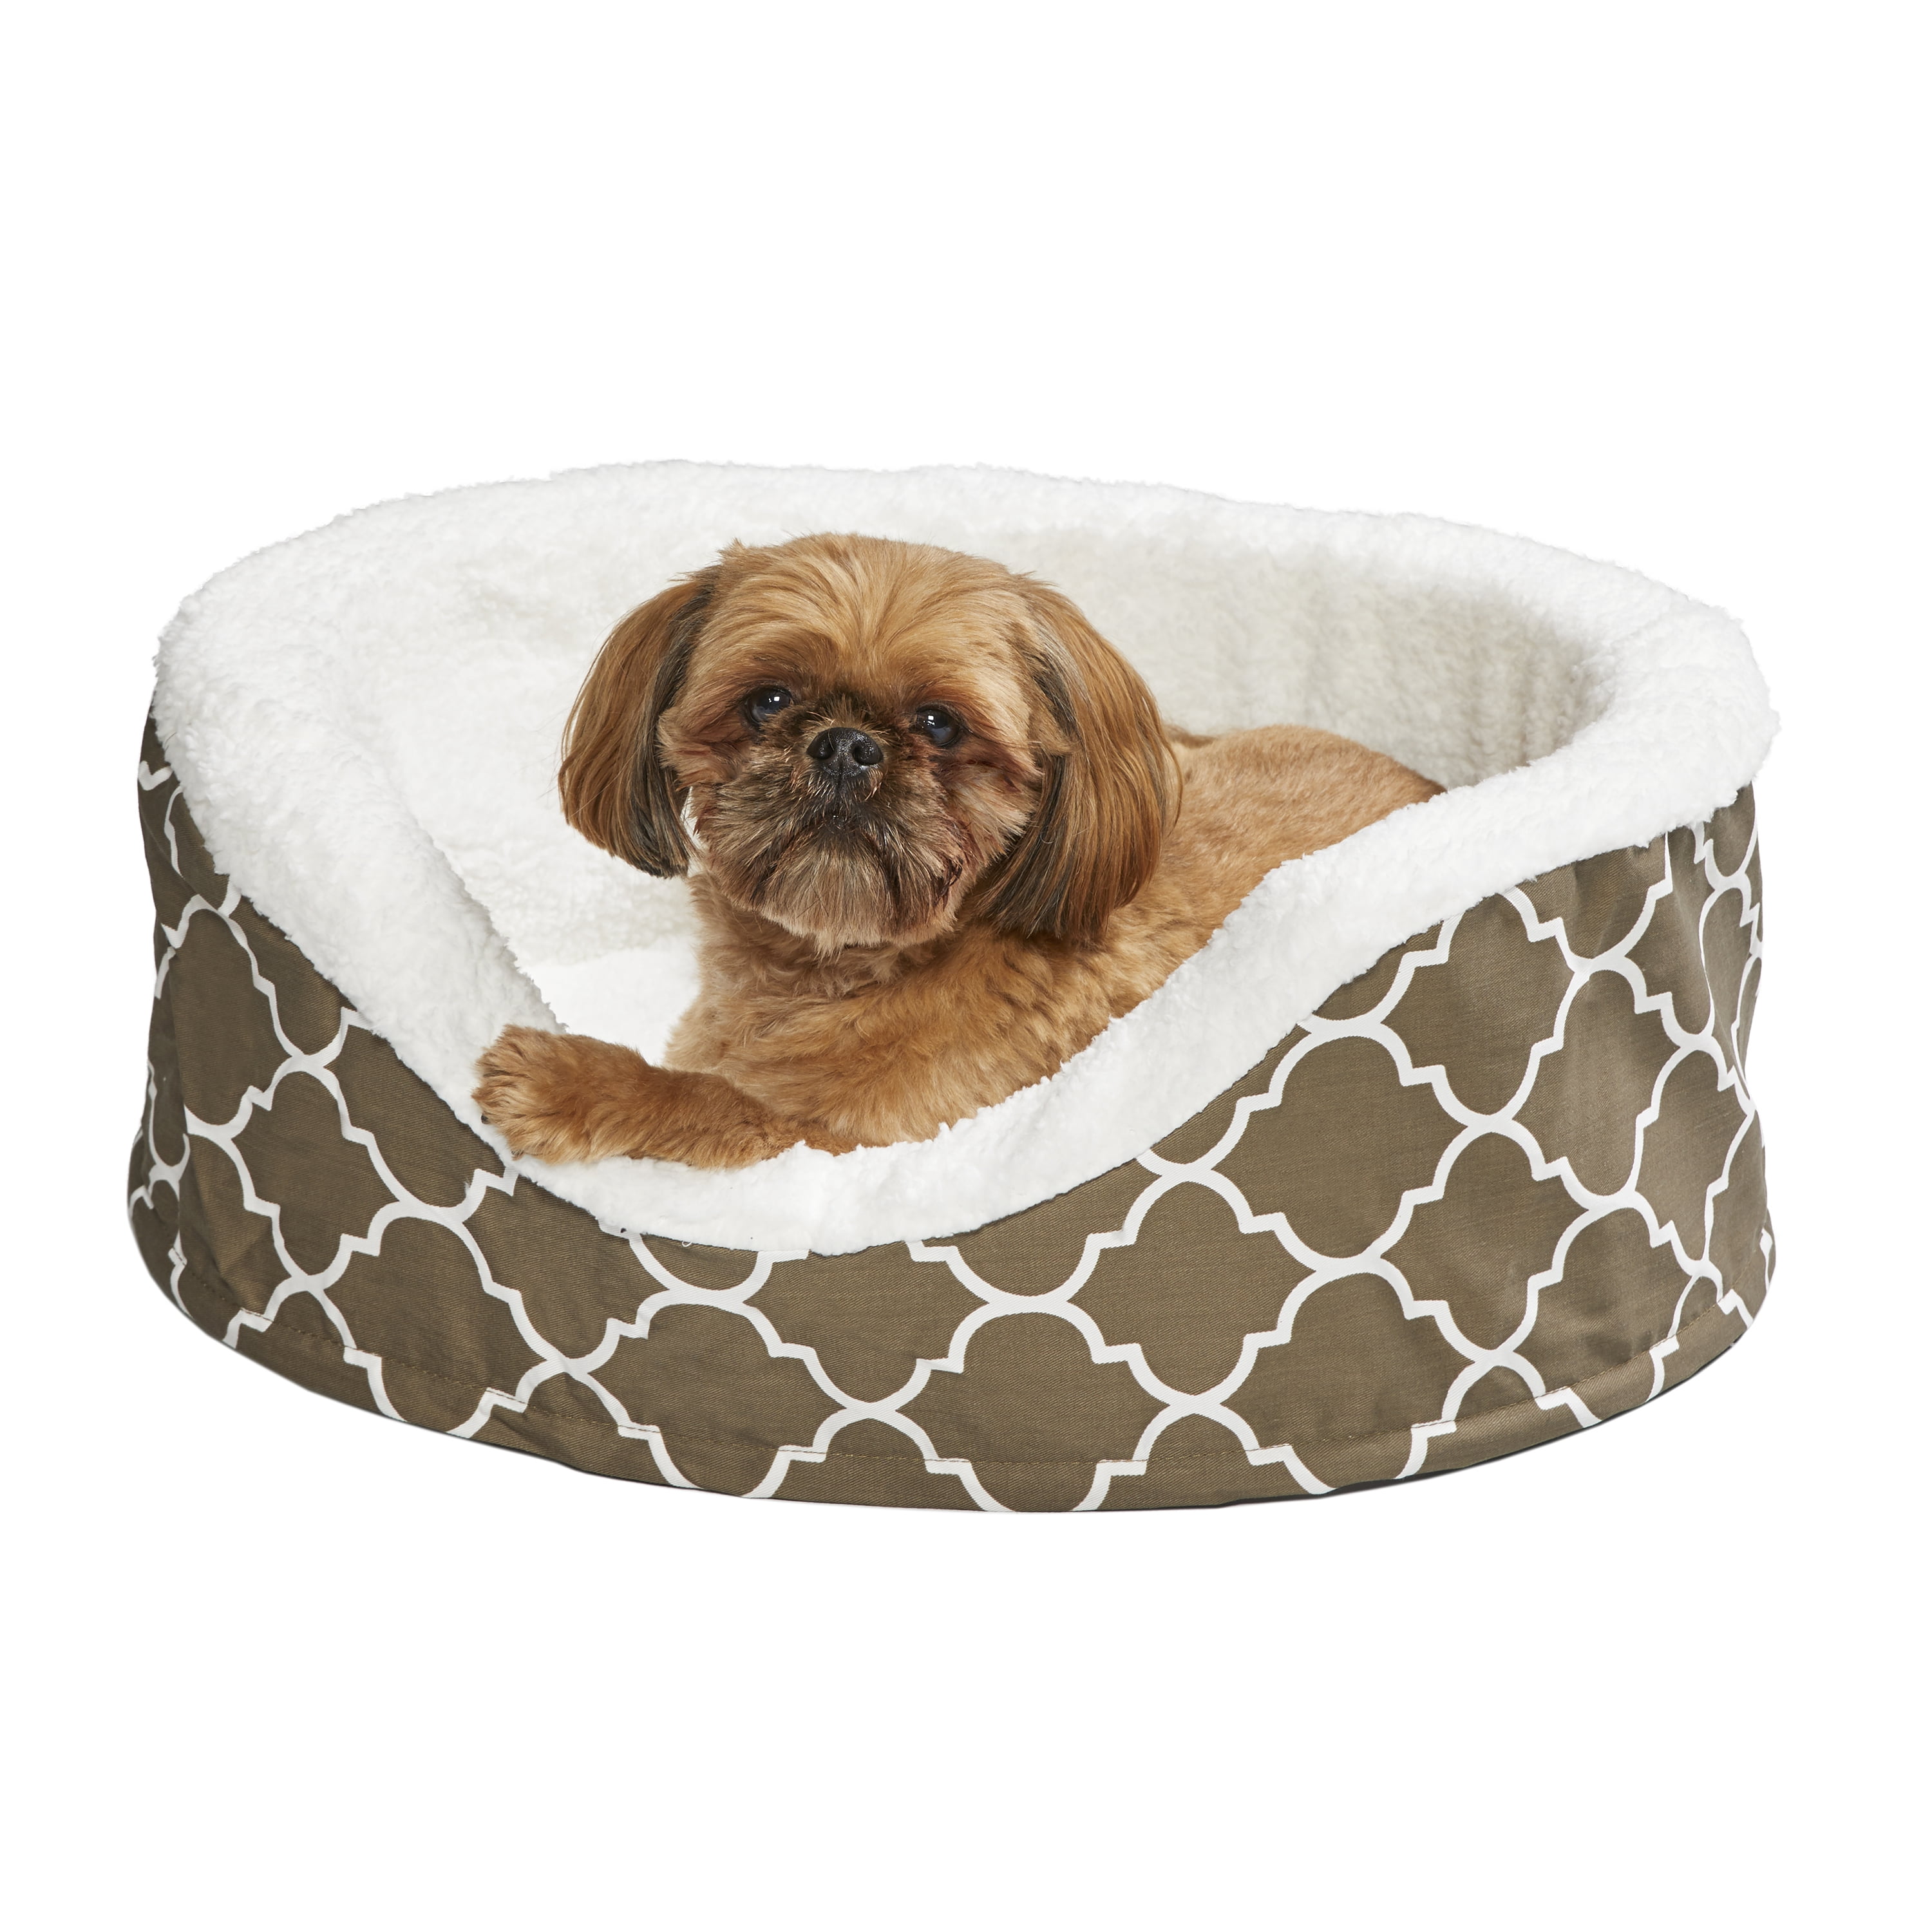 MidWest Orthopedic Nesting Dog Bed with Teflon, Small, Brown